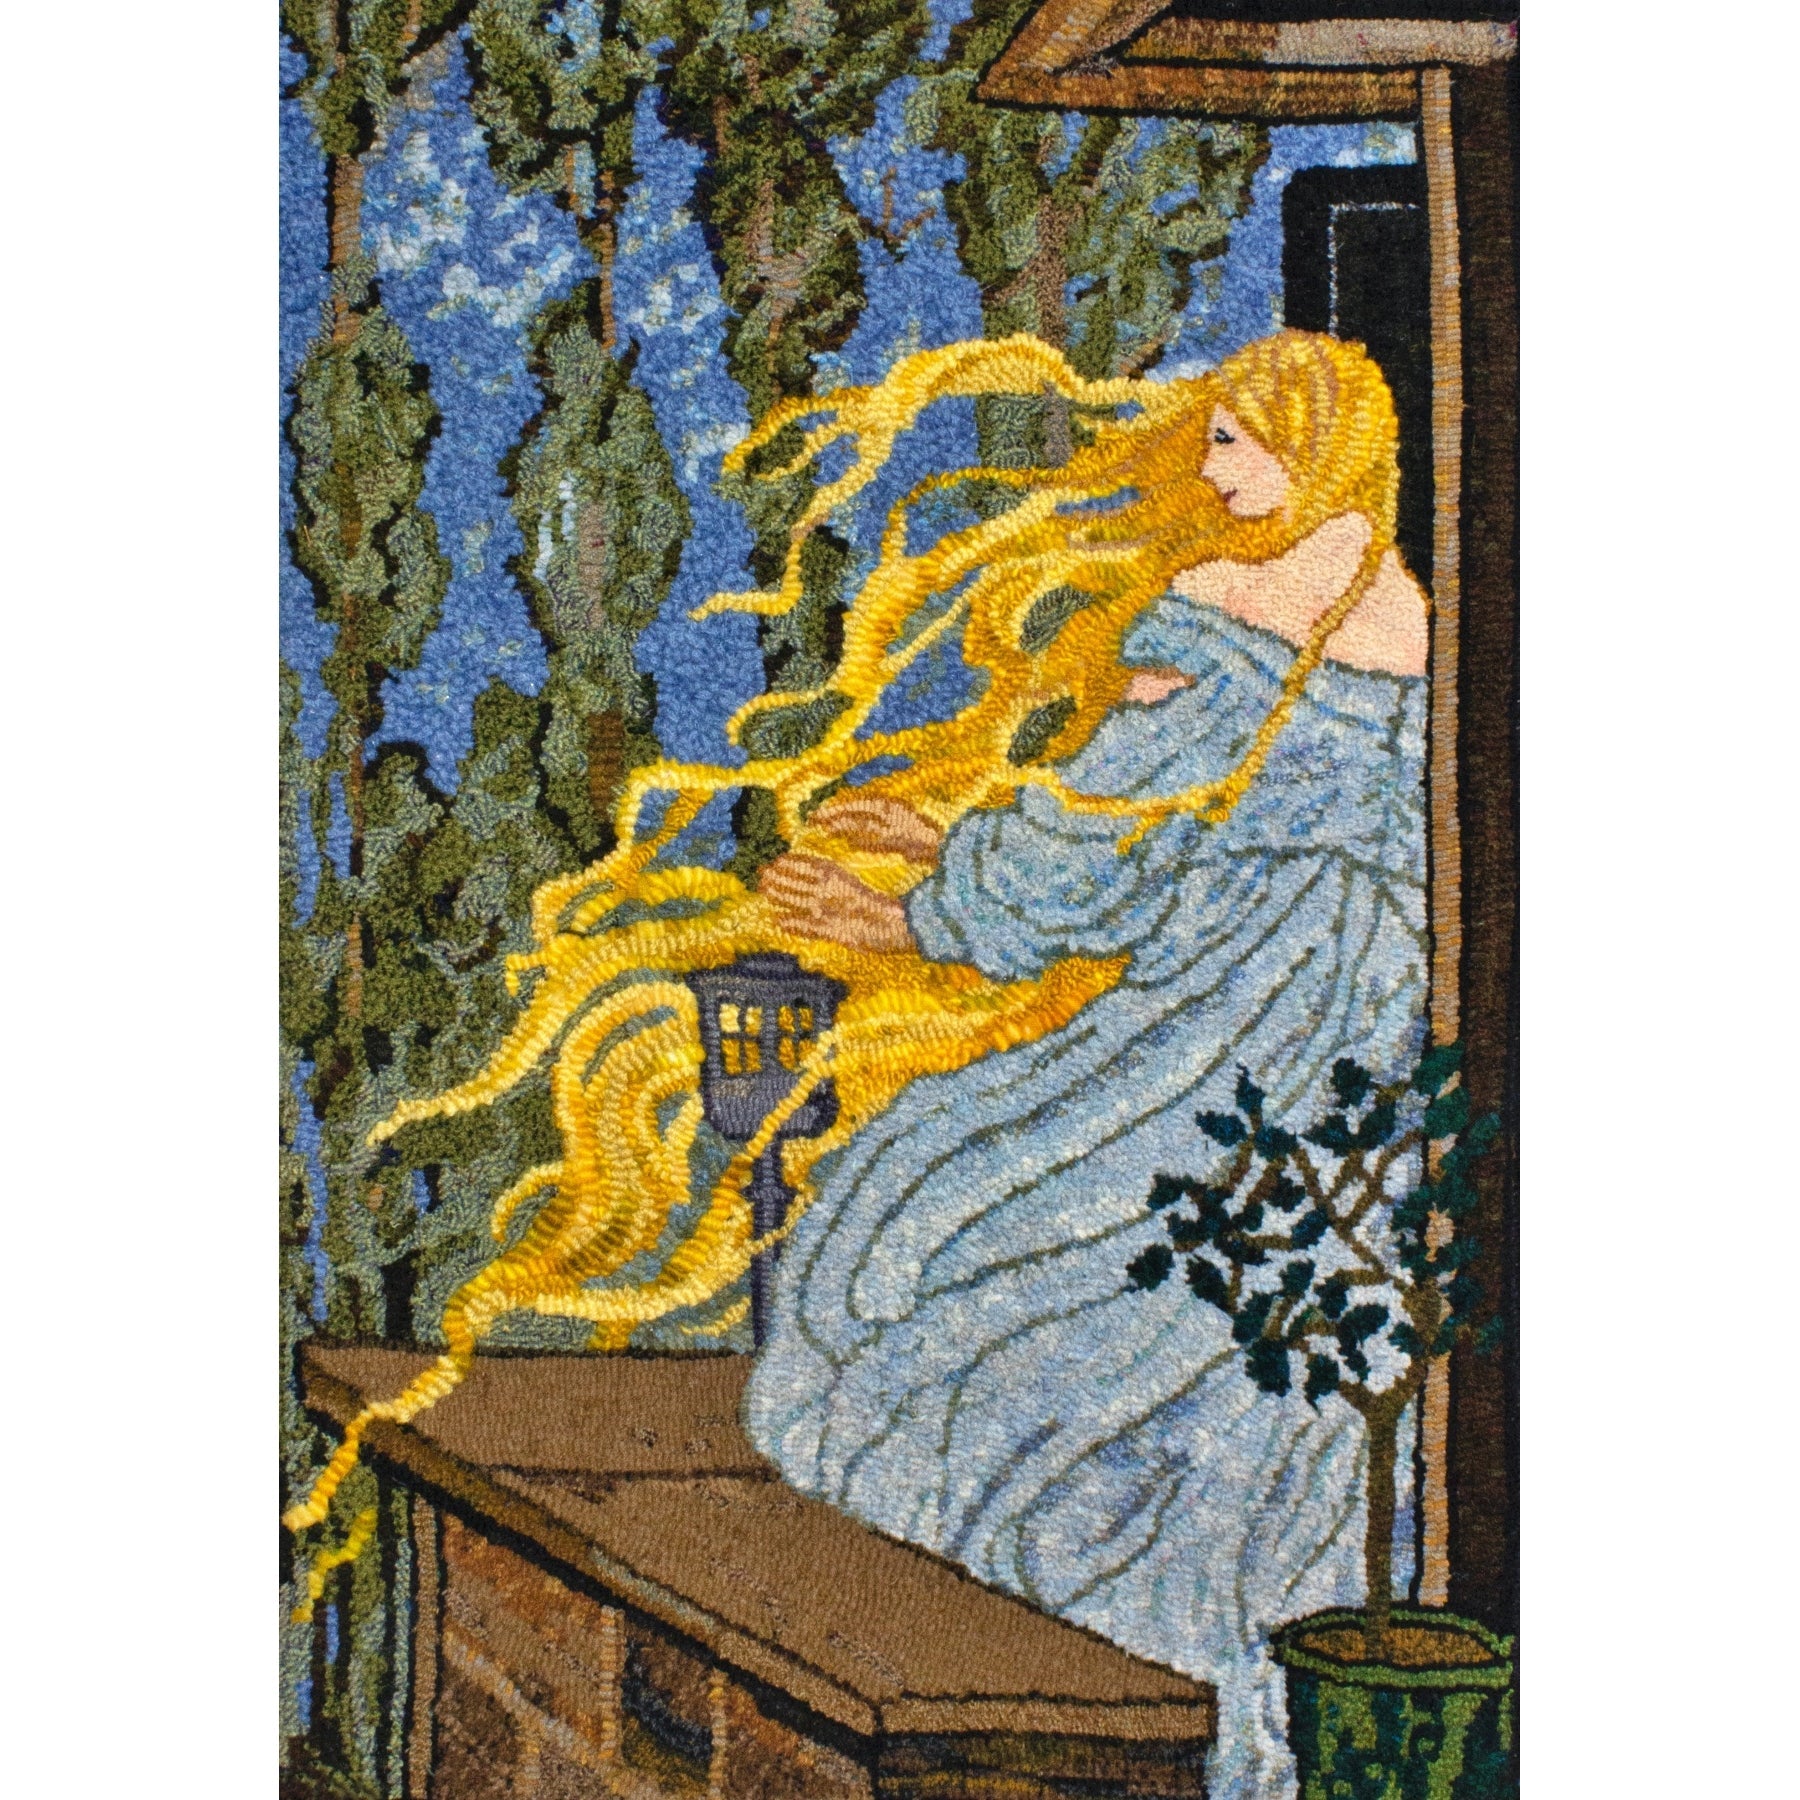 Rapunzel, ill. Emma Florence Henderson, 1891, rug hooked by Judy Carter